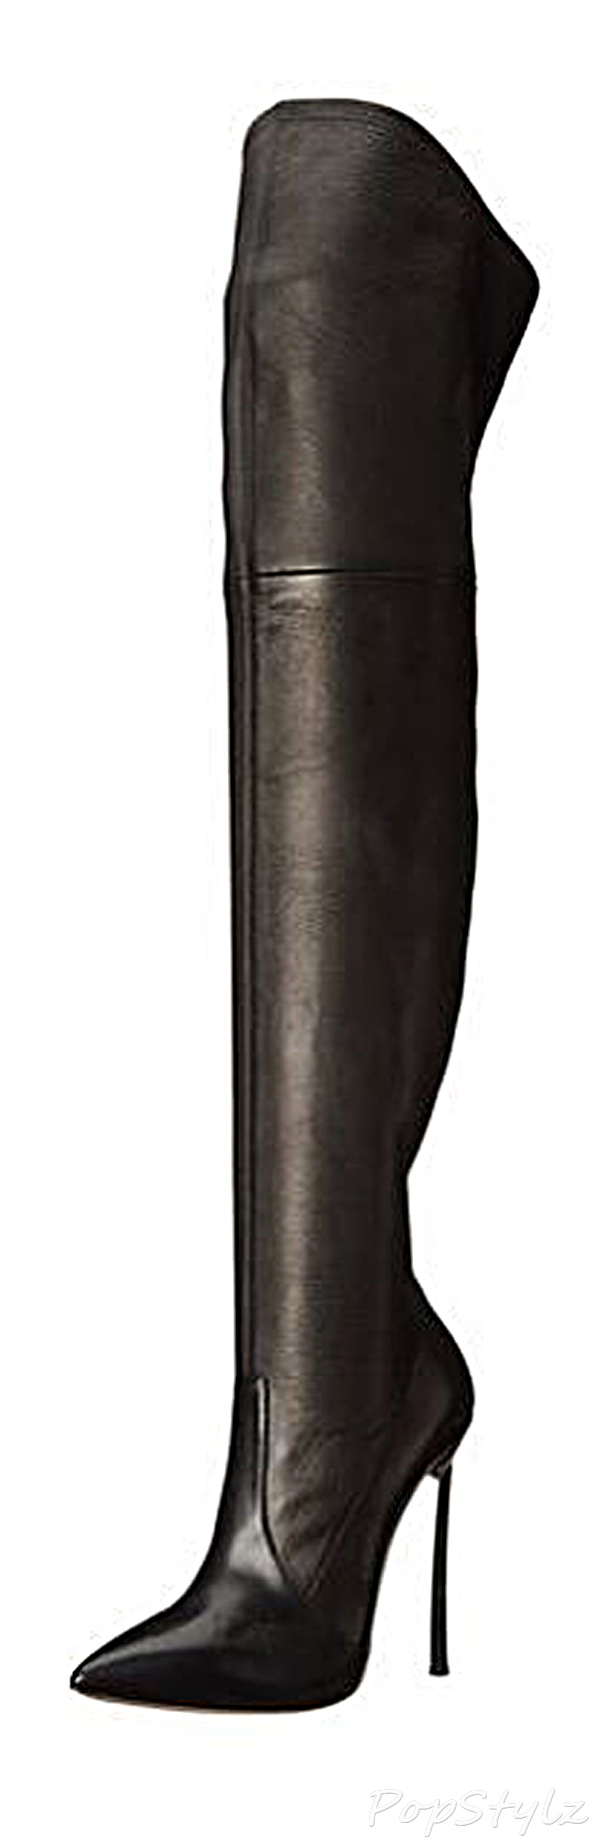 Casadei Over-the-Knee Italian Leather Boot